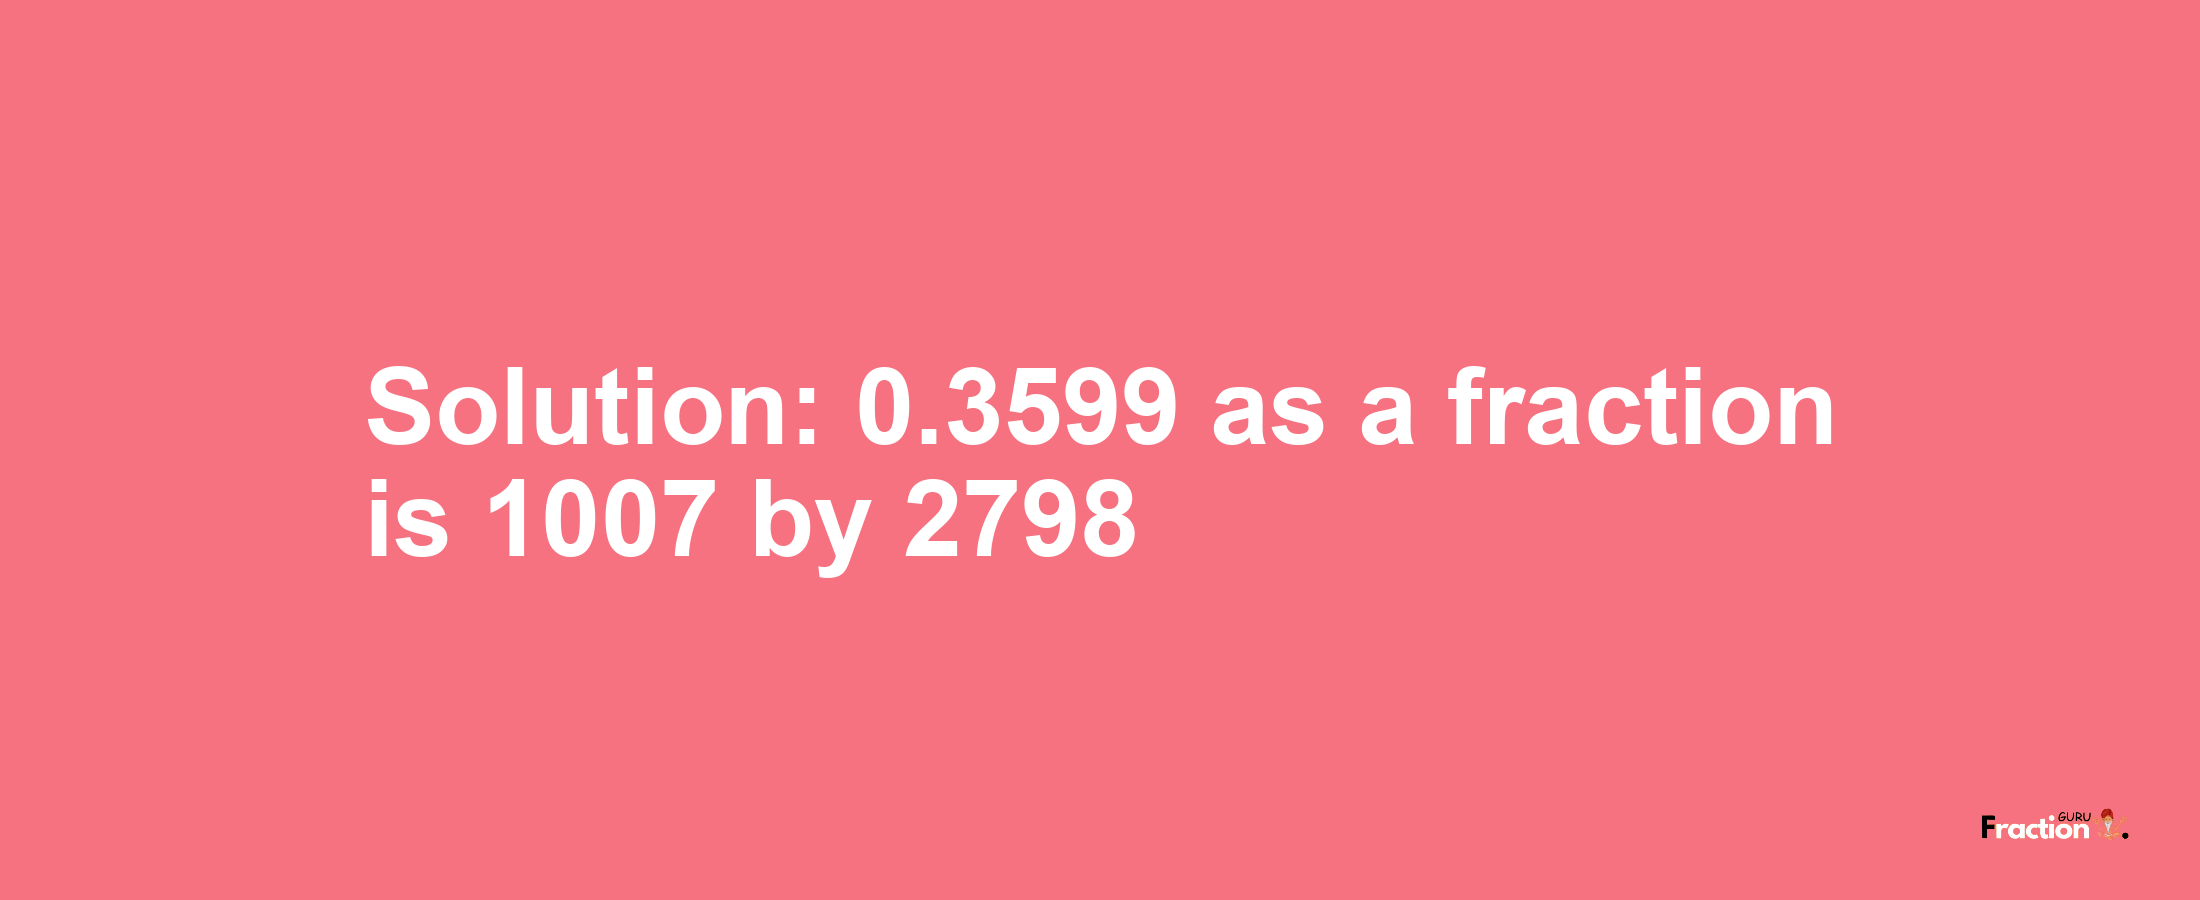 Solution:0.3599 as a fraction is 1007/2798